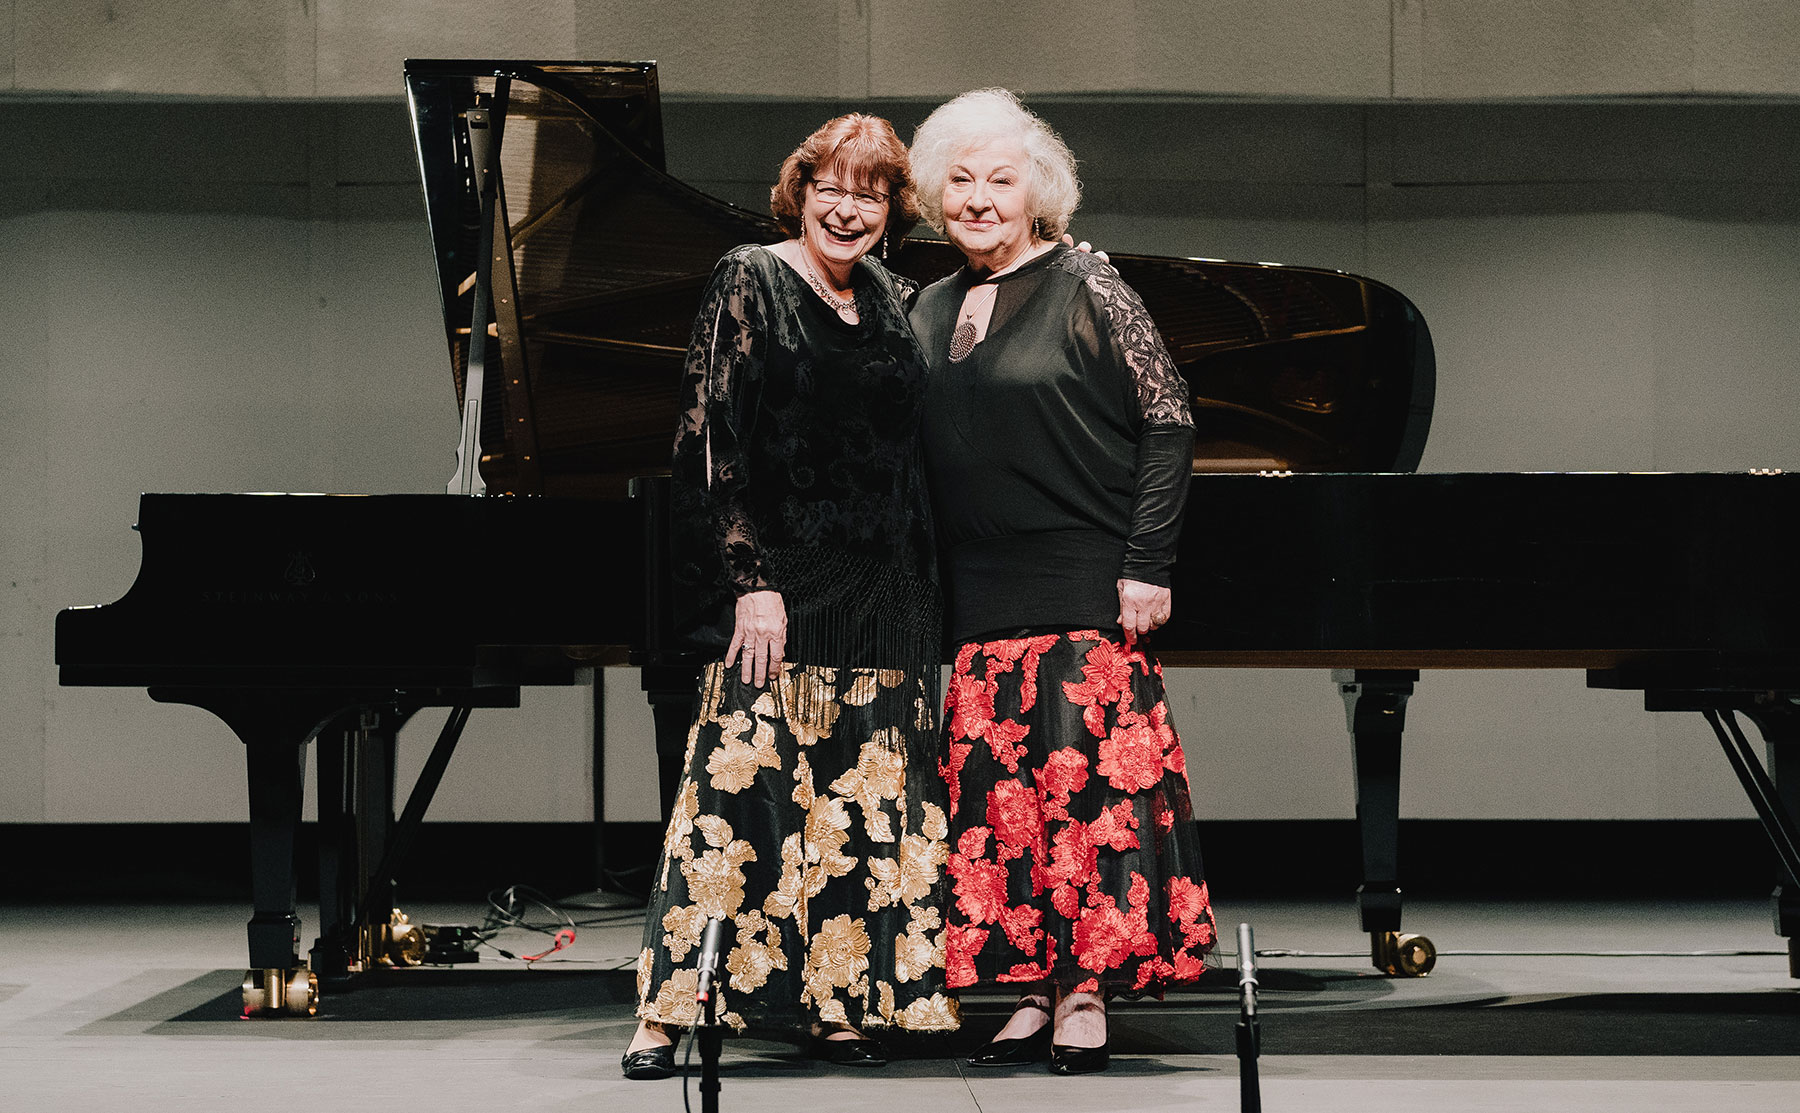 Dr. Linda Apple Monson and Dr. Anna Balakerskaia taking a bow after the 2022 A Grand Piano Celebration.